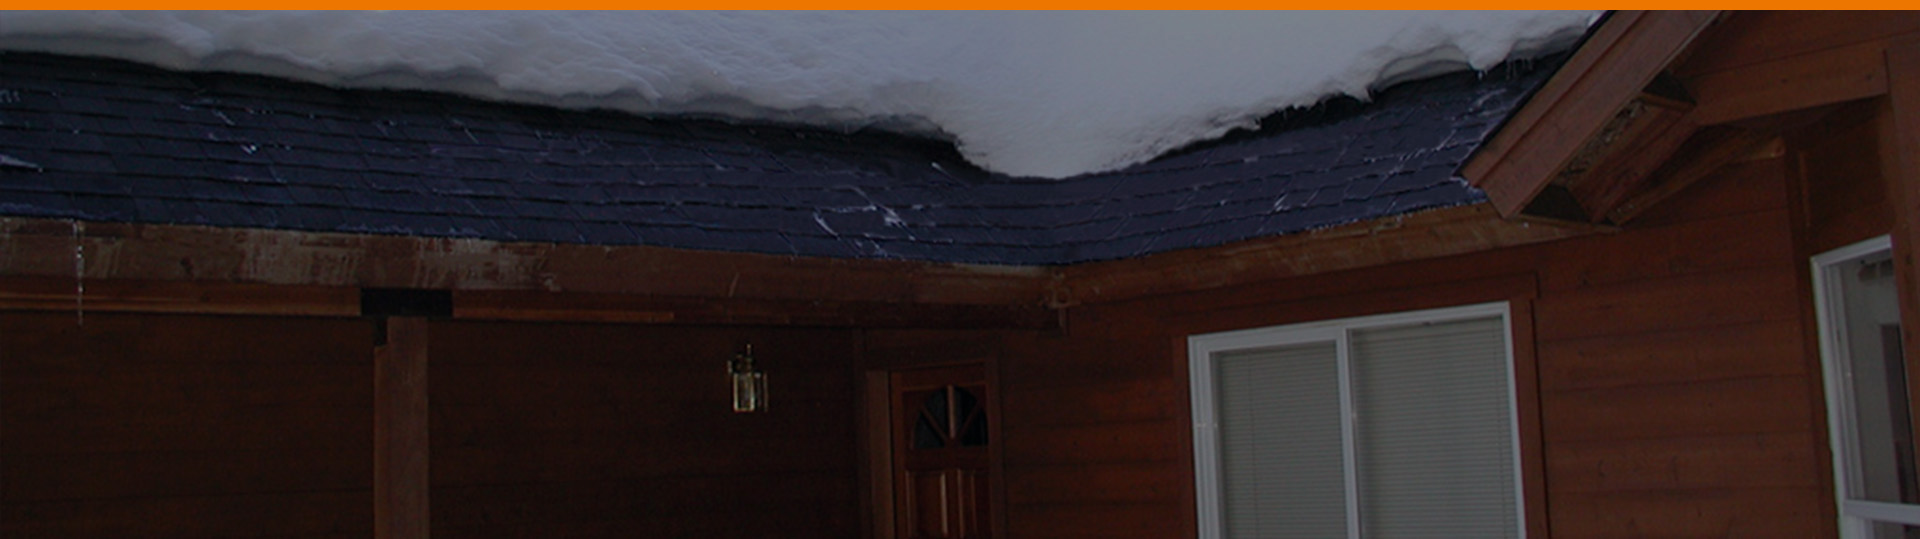 Best roof heating systems banner.